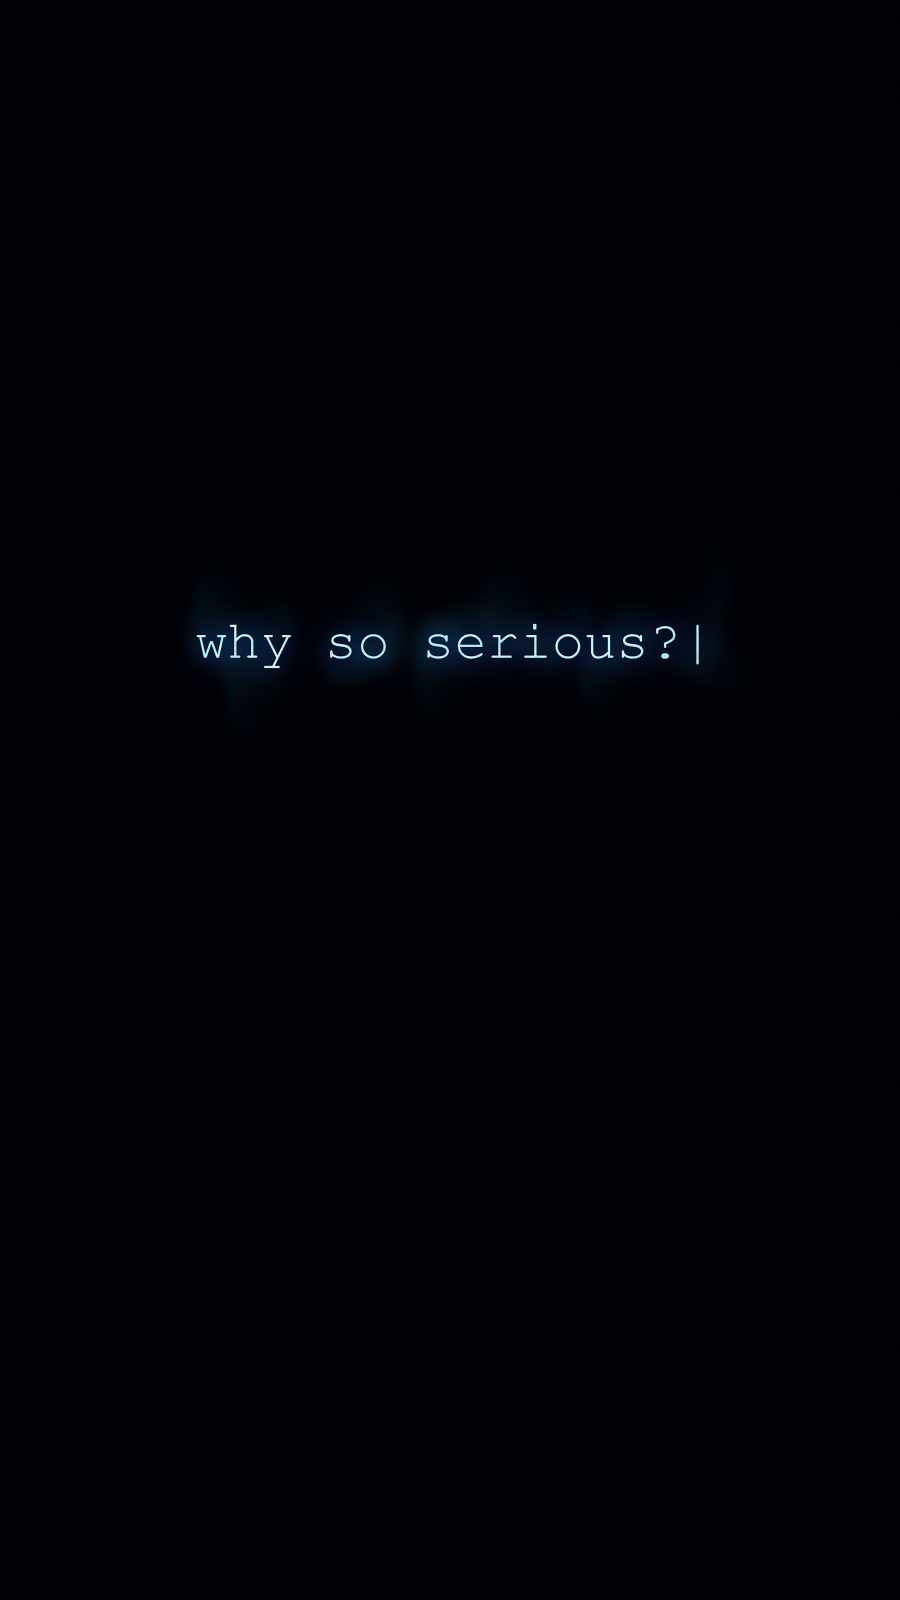 Why So Serious Wallpaper, iPhone Wallpaper